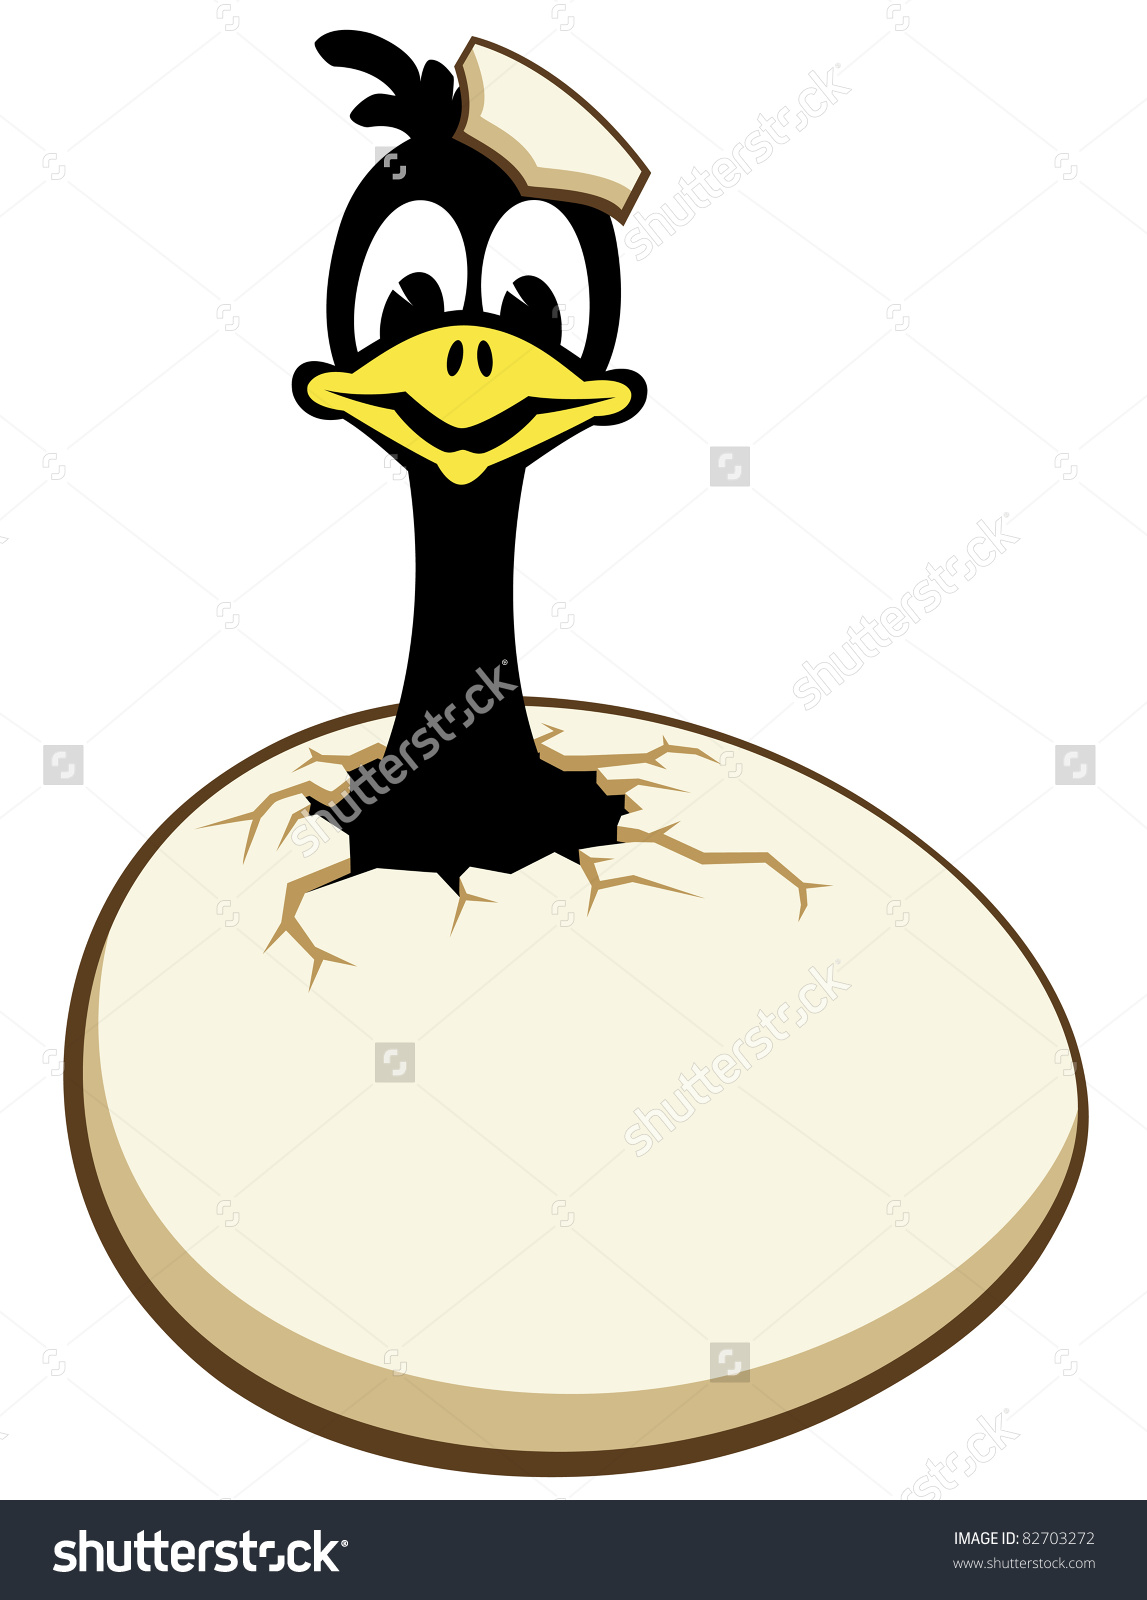 Showing post & media for Cartoon ostrich egg.